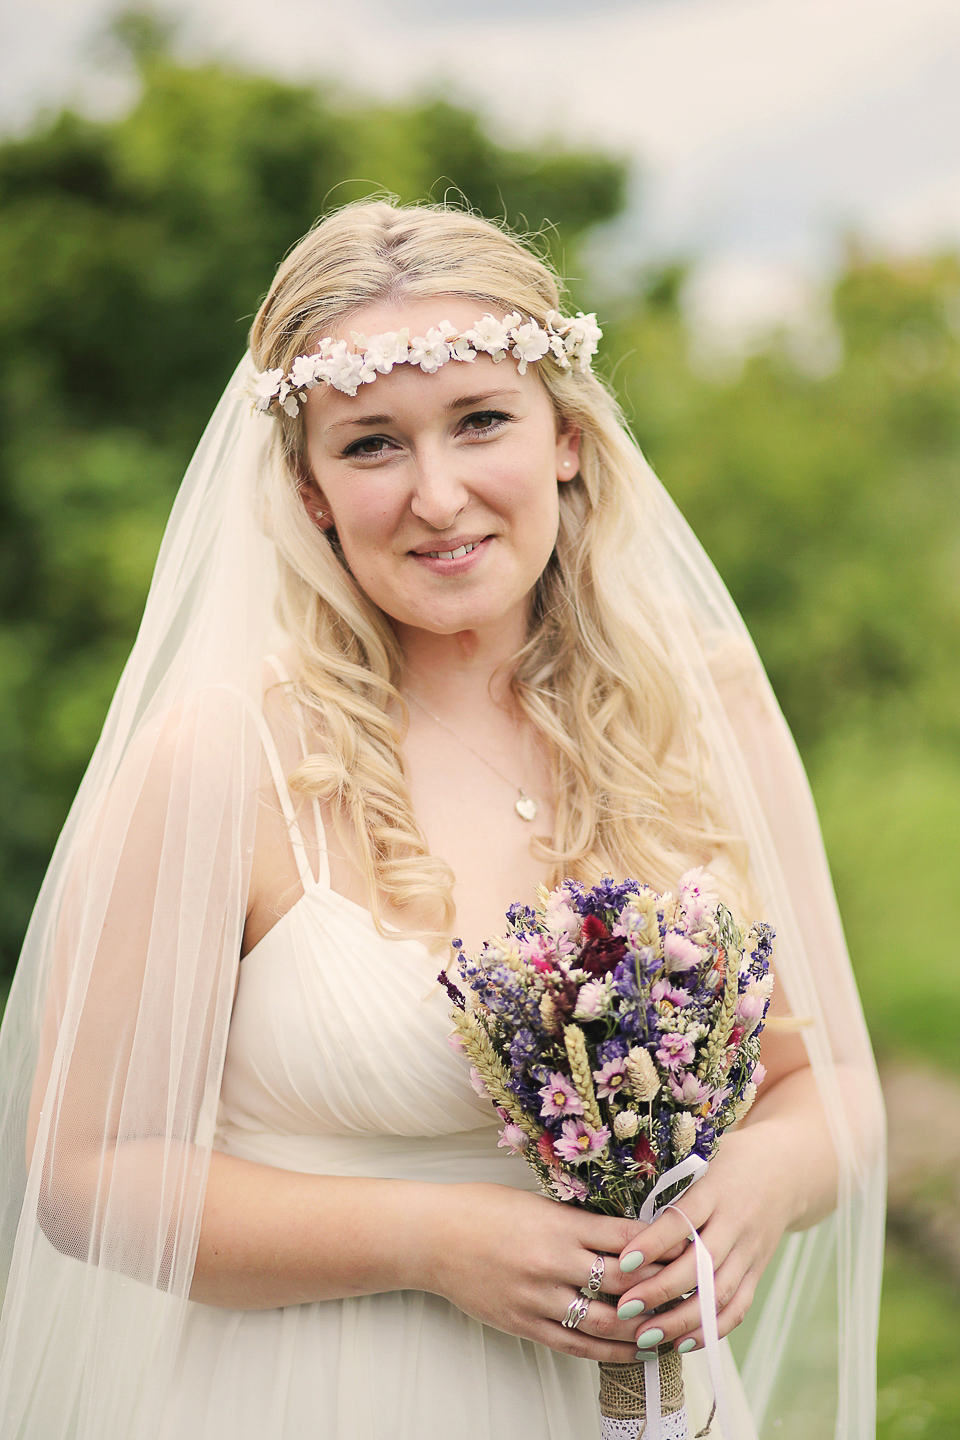 A boho bride and her woodland inspired wedding at Newon Hall, Northumberland. Photography by Helen Russell.